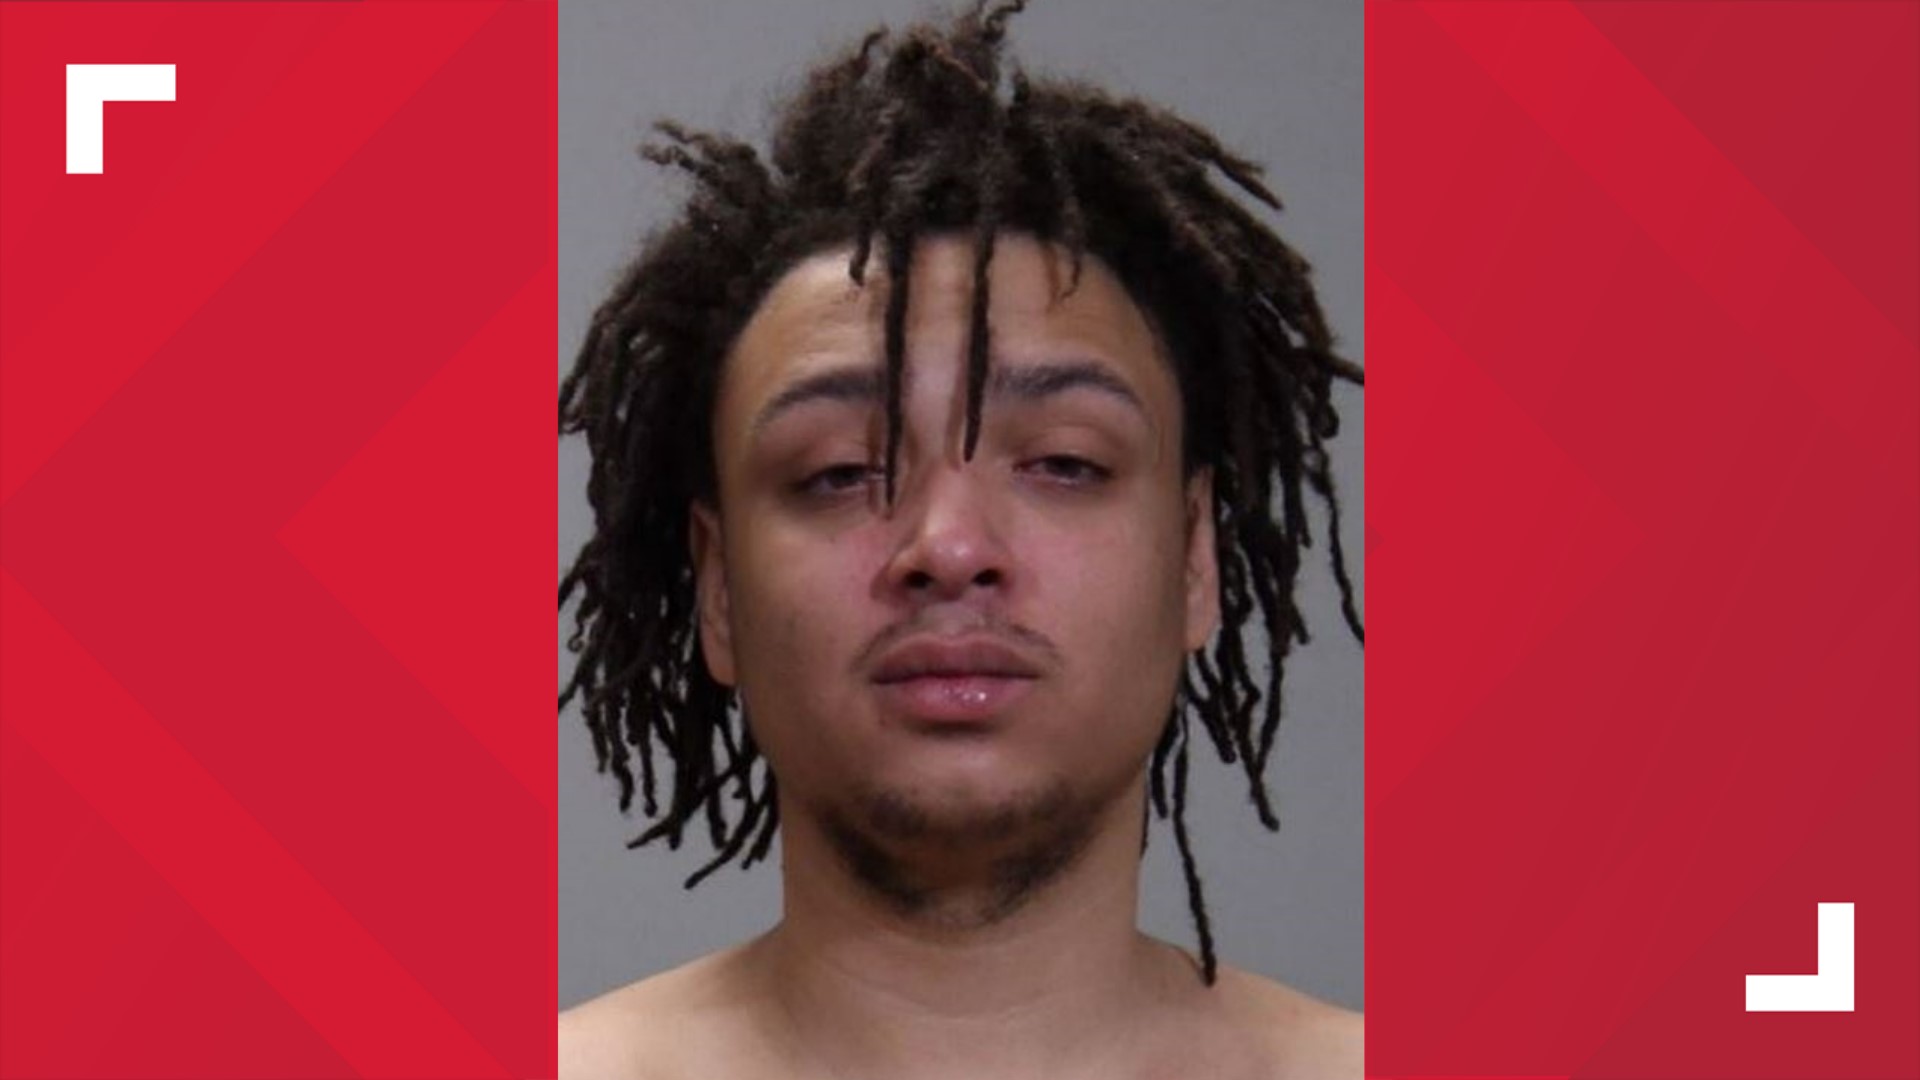 Dayveion Carroll, 20, is charged with murder in the death of 20-year-old Saadiq Teague on Monday.